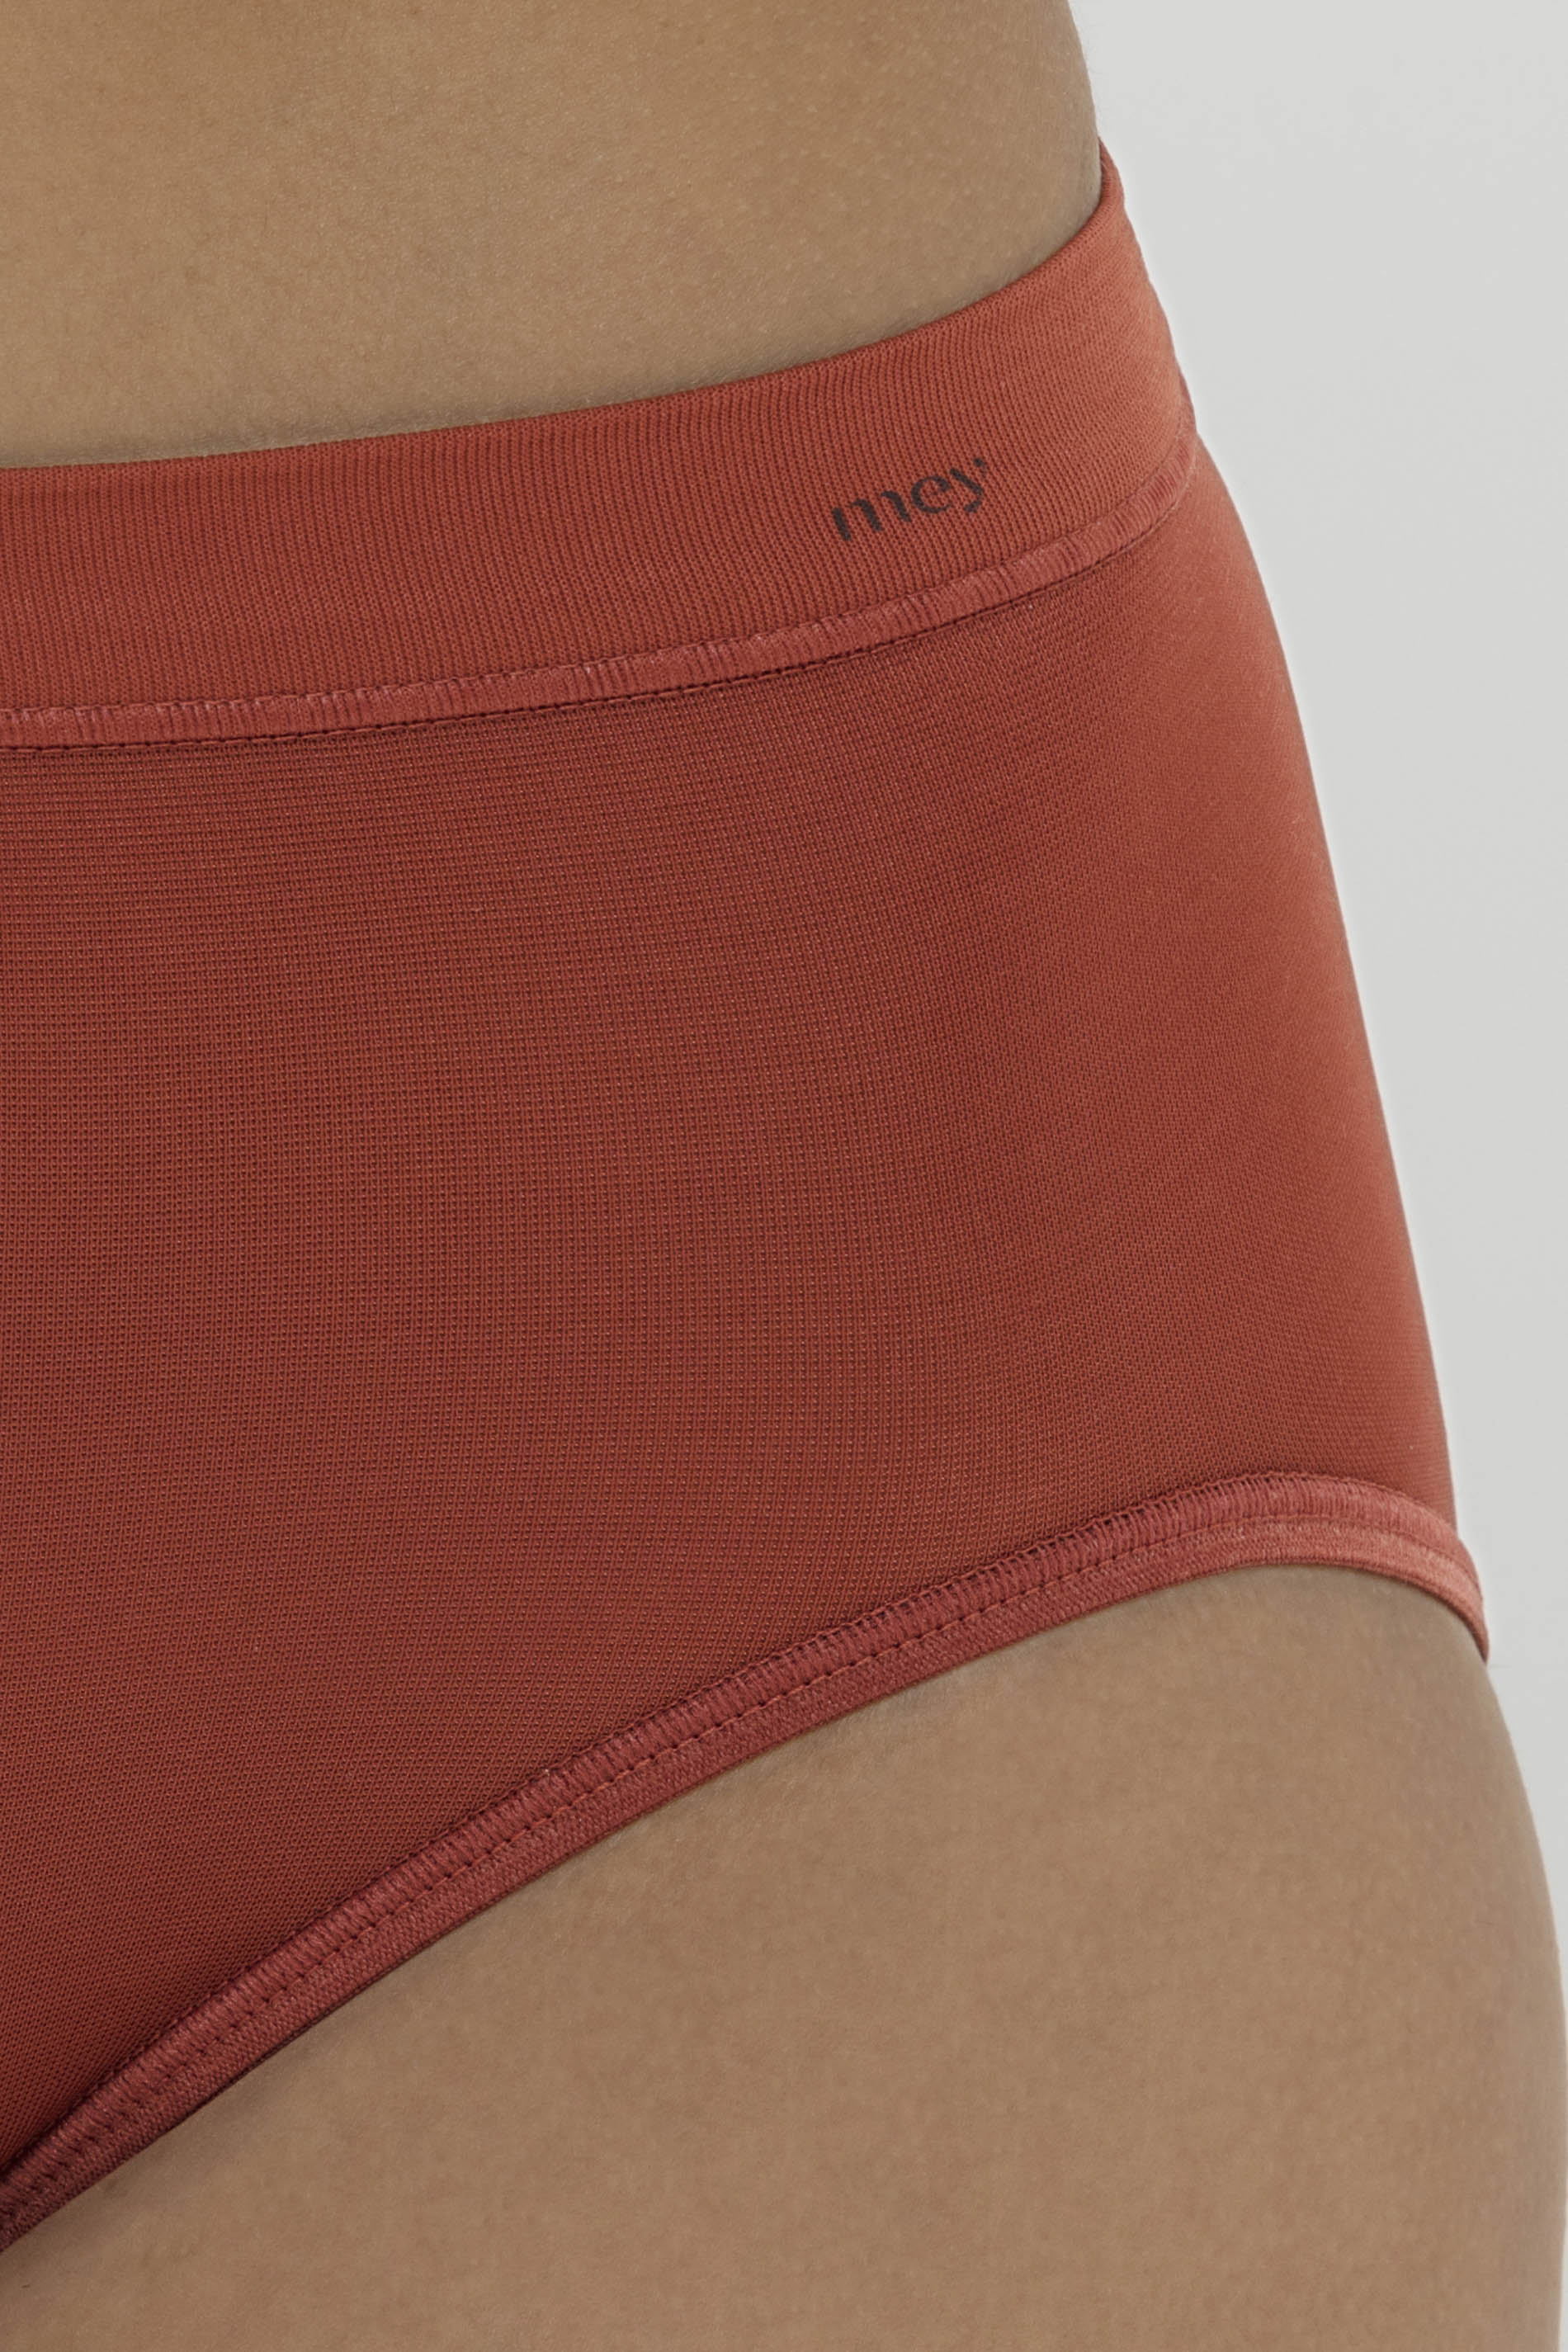 Taille-pants Red Pepper Serie Emotion Detailweergave 01 | mey®